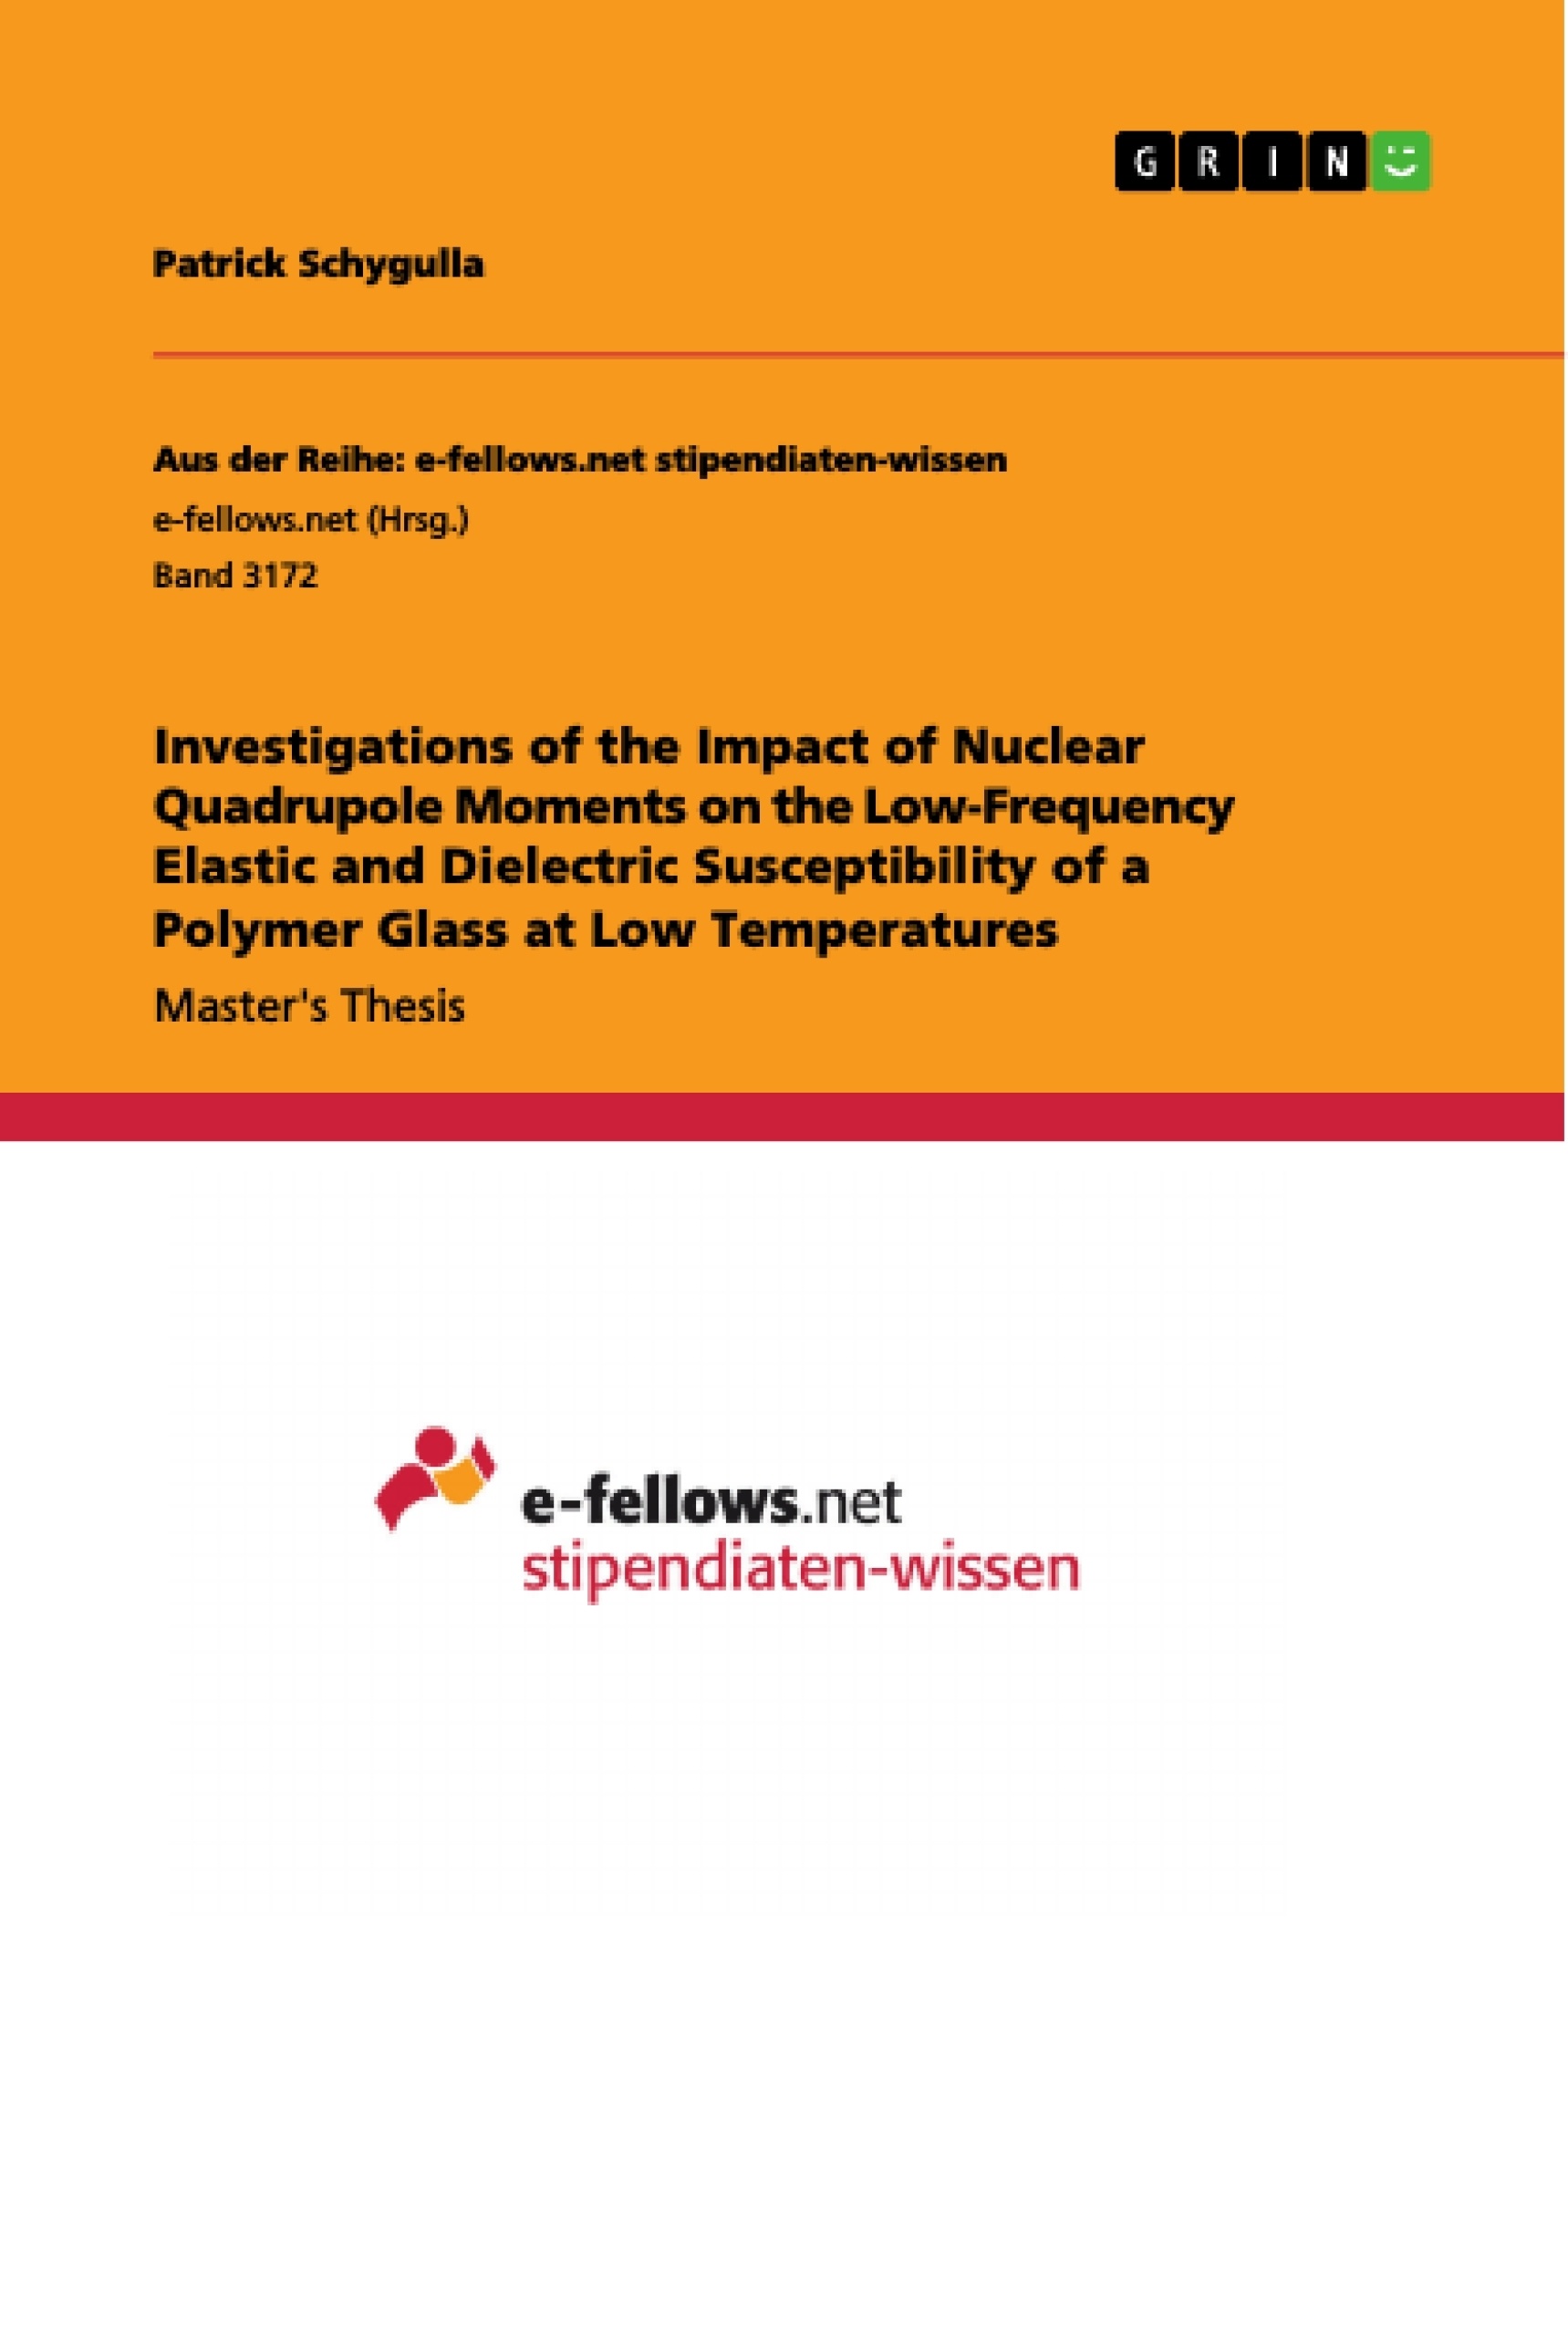 Titre: Investigations of the Impact of Nuclear Quadrupole Moments on the Low-Frequency Elastic and Dielectric Susceptibility of a Polymer Glass at Low Temperatures